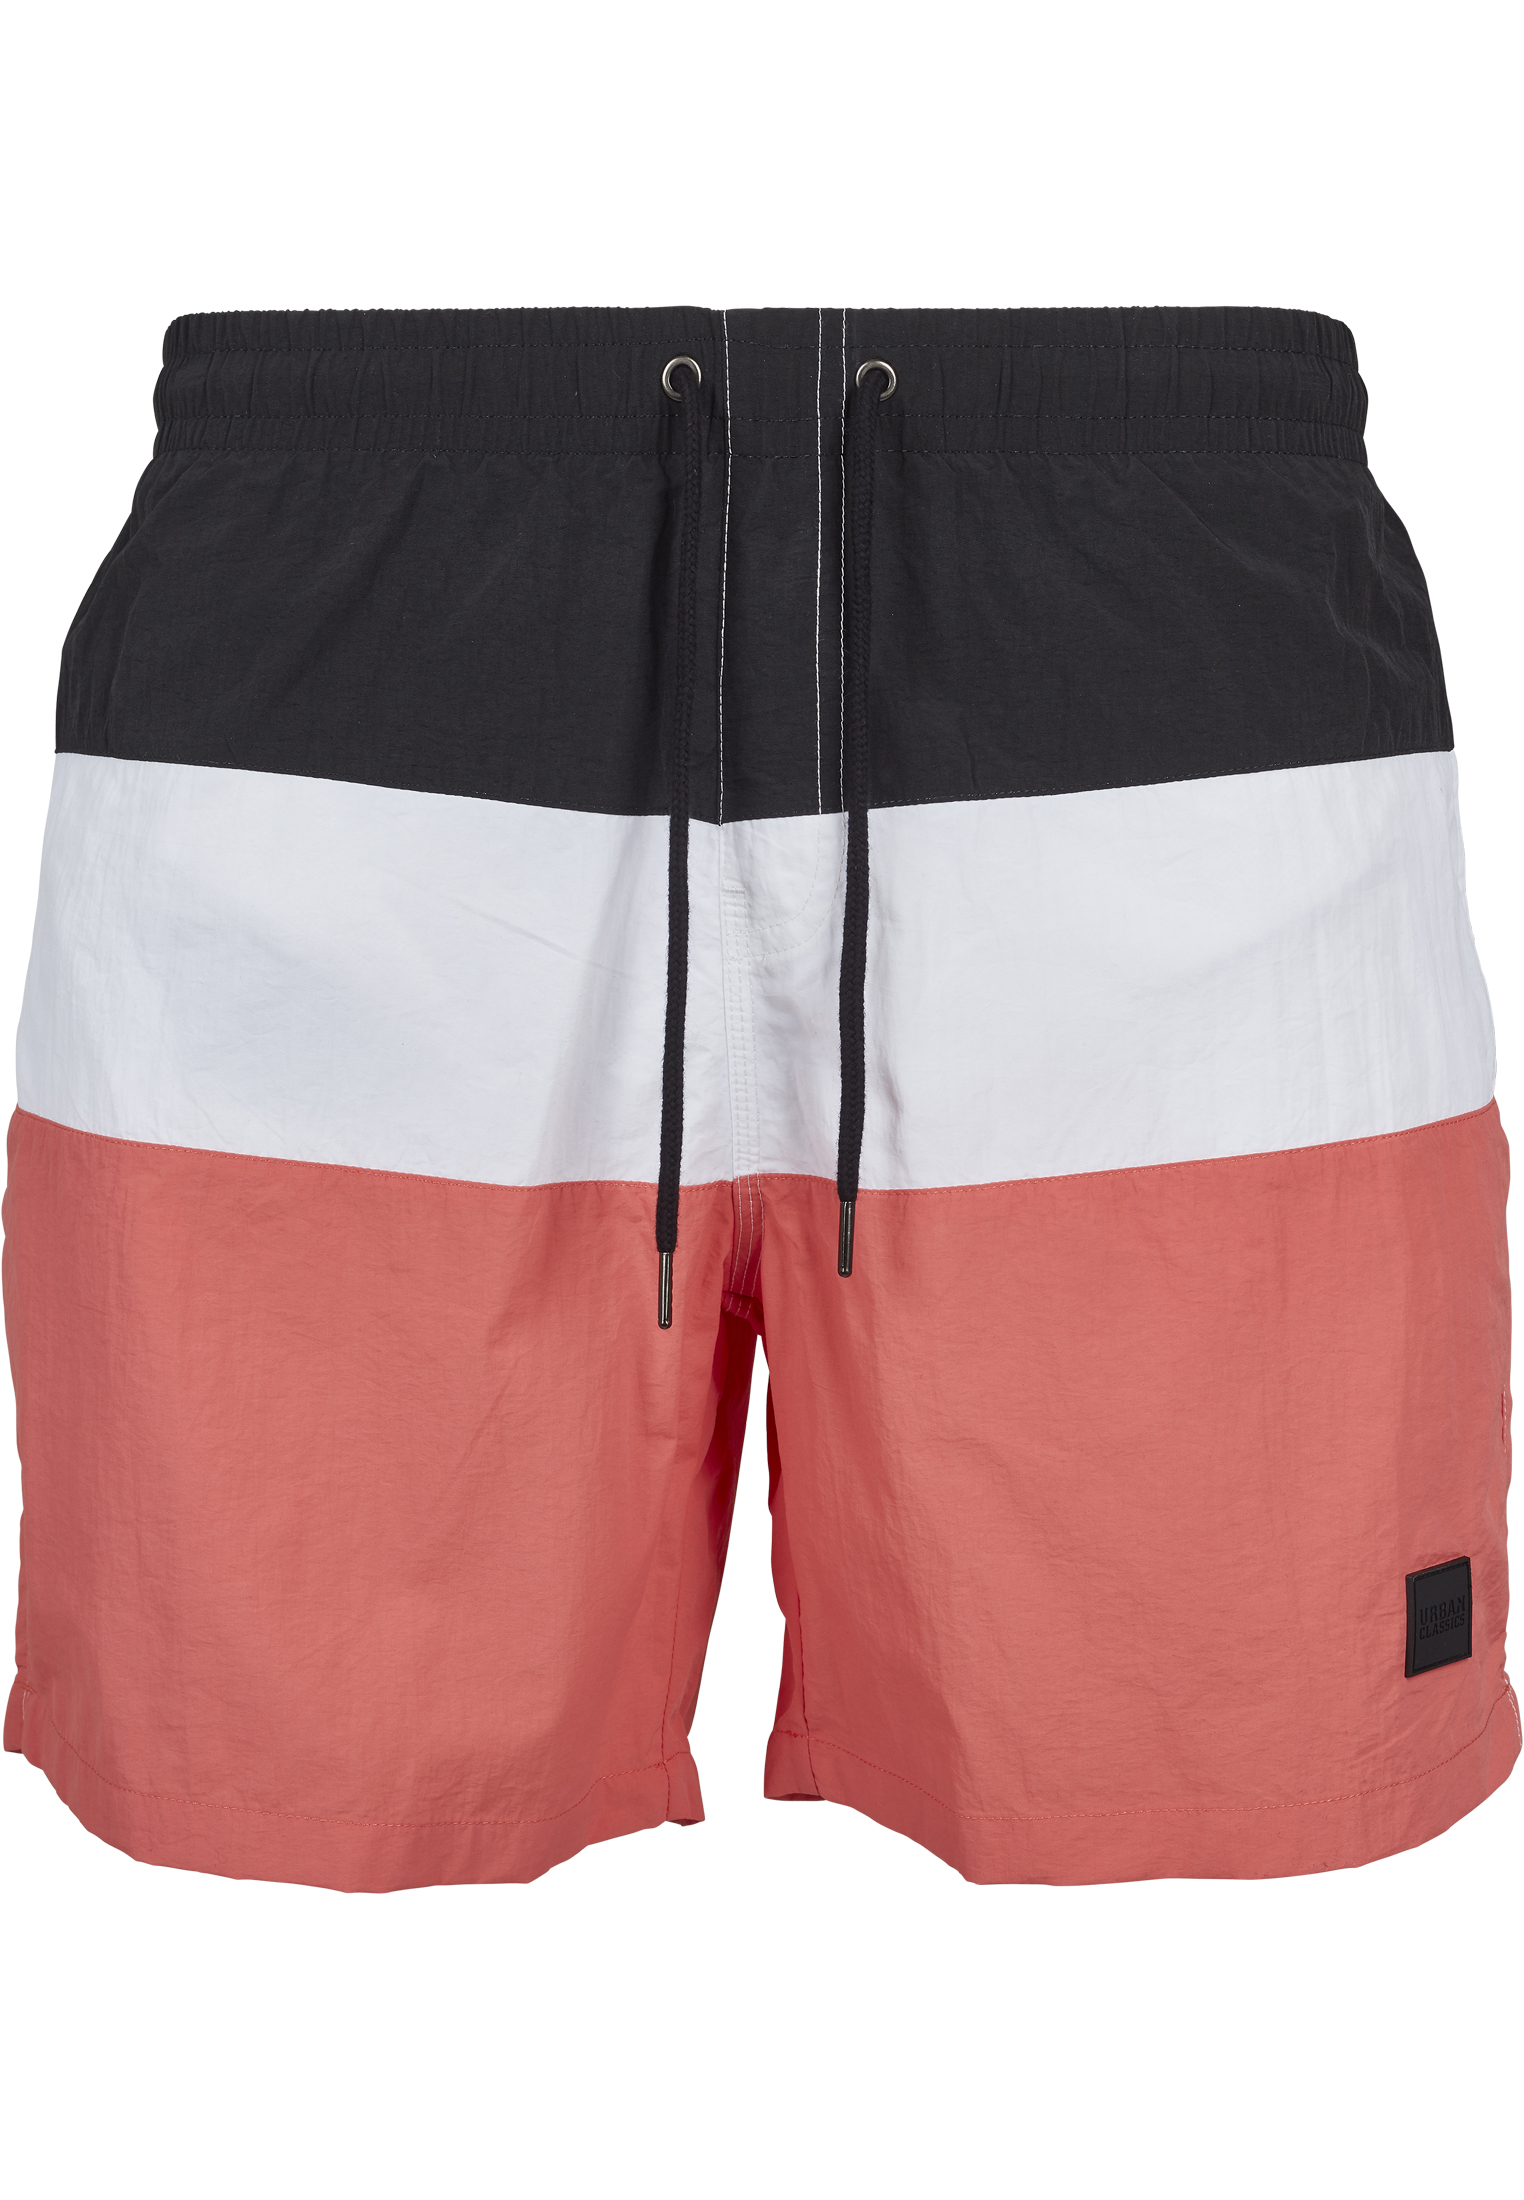 Bademode Color Block Swimshorts in Farbe coral/blk/wht